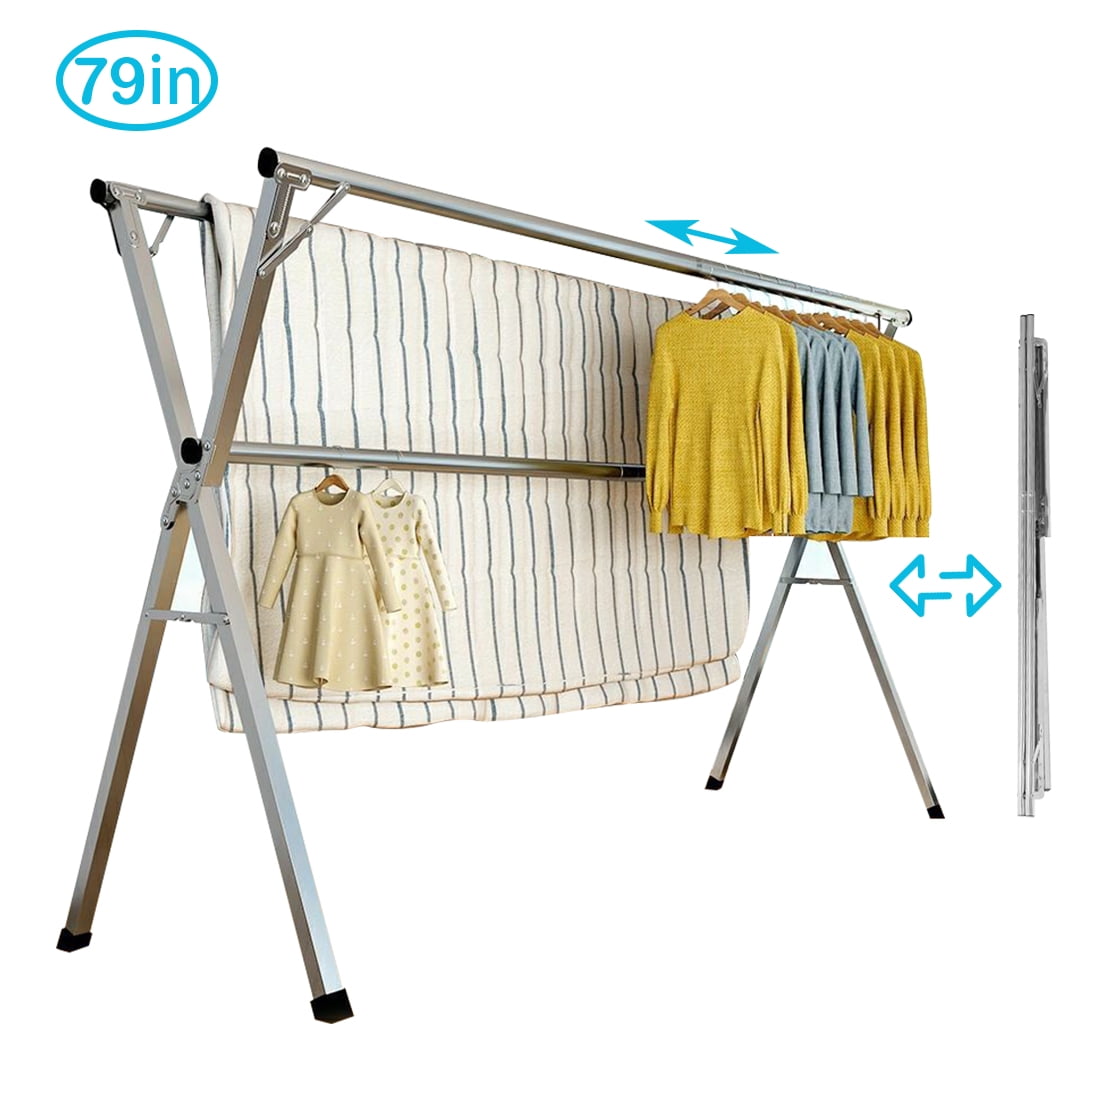 Untyo Clothes Drying Rack 79 Inches, Laundry Drying Rack